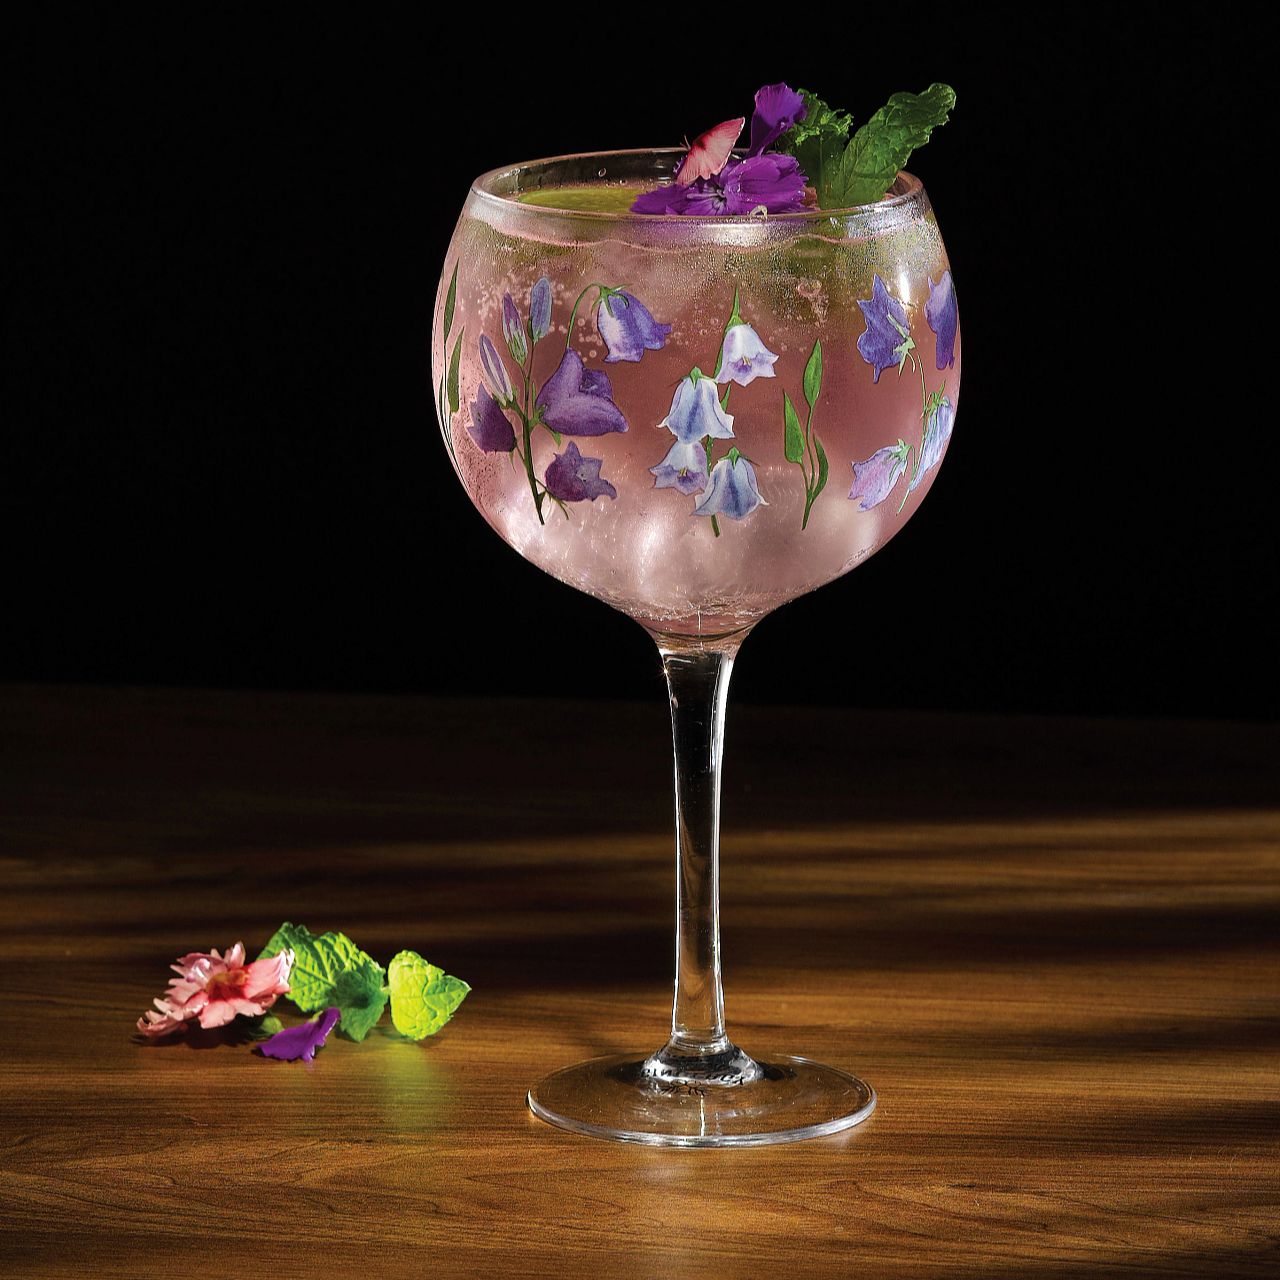 Ginology Bluebell Copa Gin Glass  Beautiful in blue, this Bluebell Gin glass is perfect for your garden parties. We recommend pairing our Bluebell glass with a premium Gin and a floral tonic Garnish with pretty blue flowers to make your drink look even cuter.